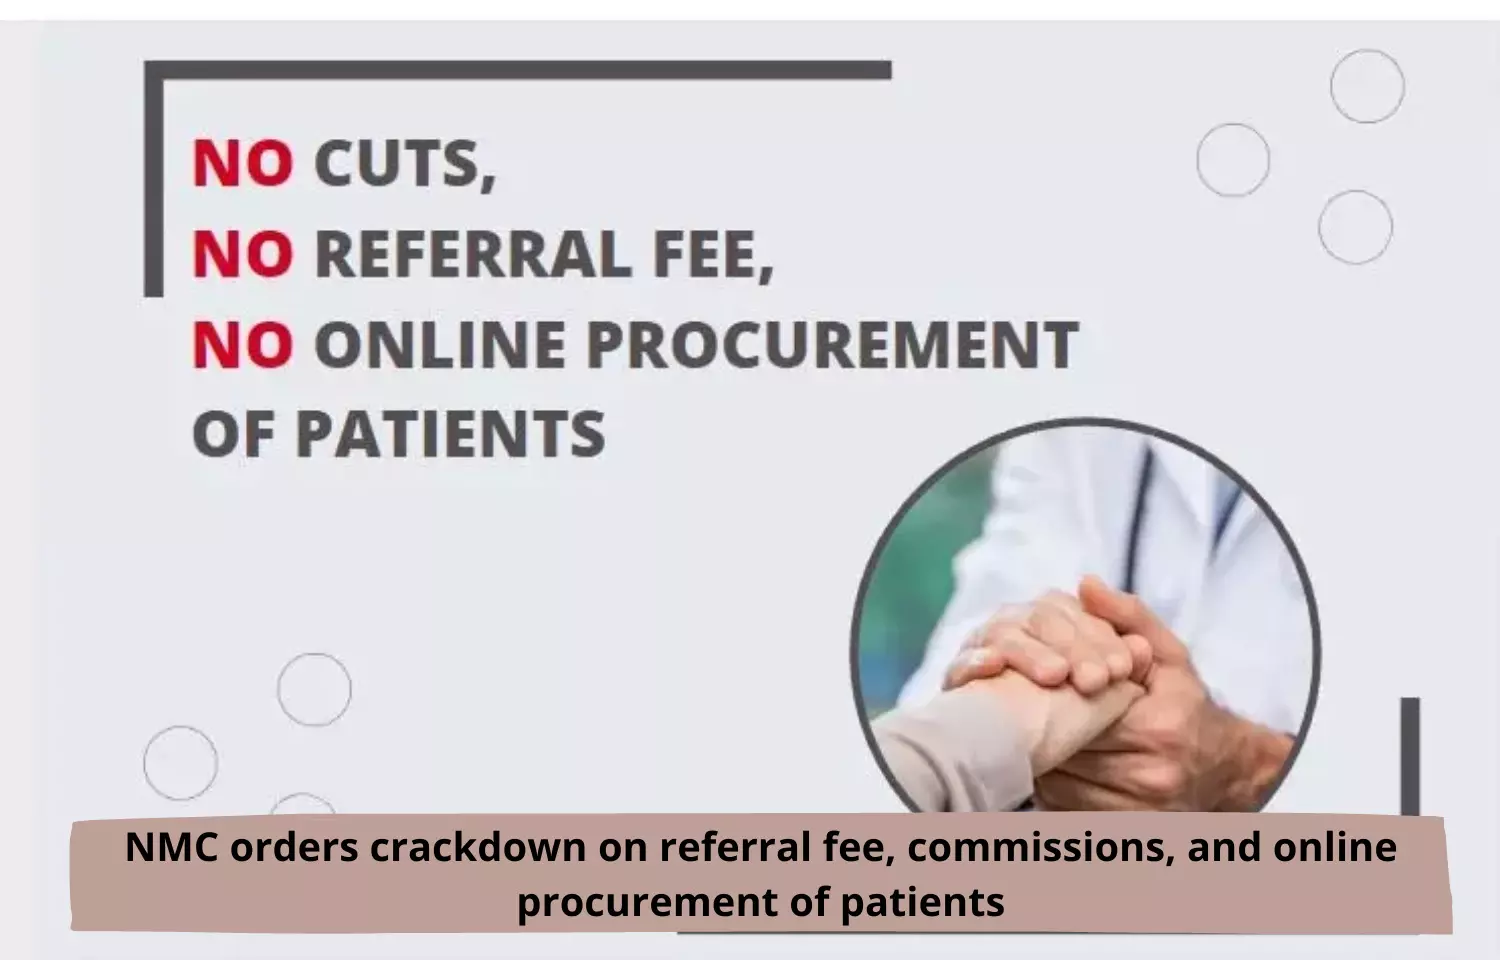 NMC orders crackdown on referral fee, commissions, and online procurement of patients